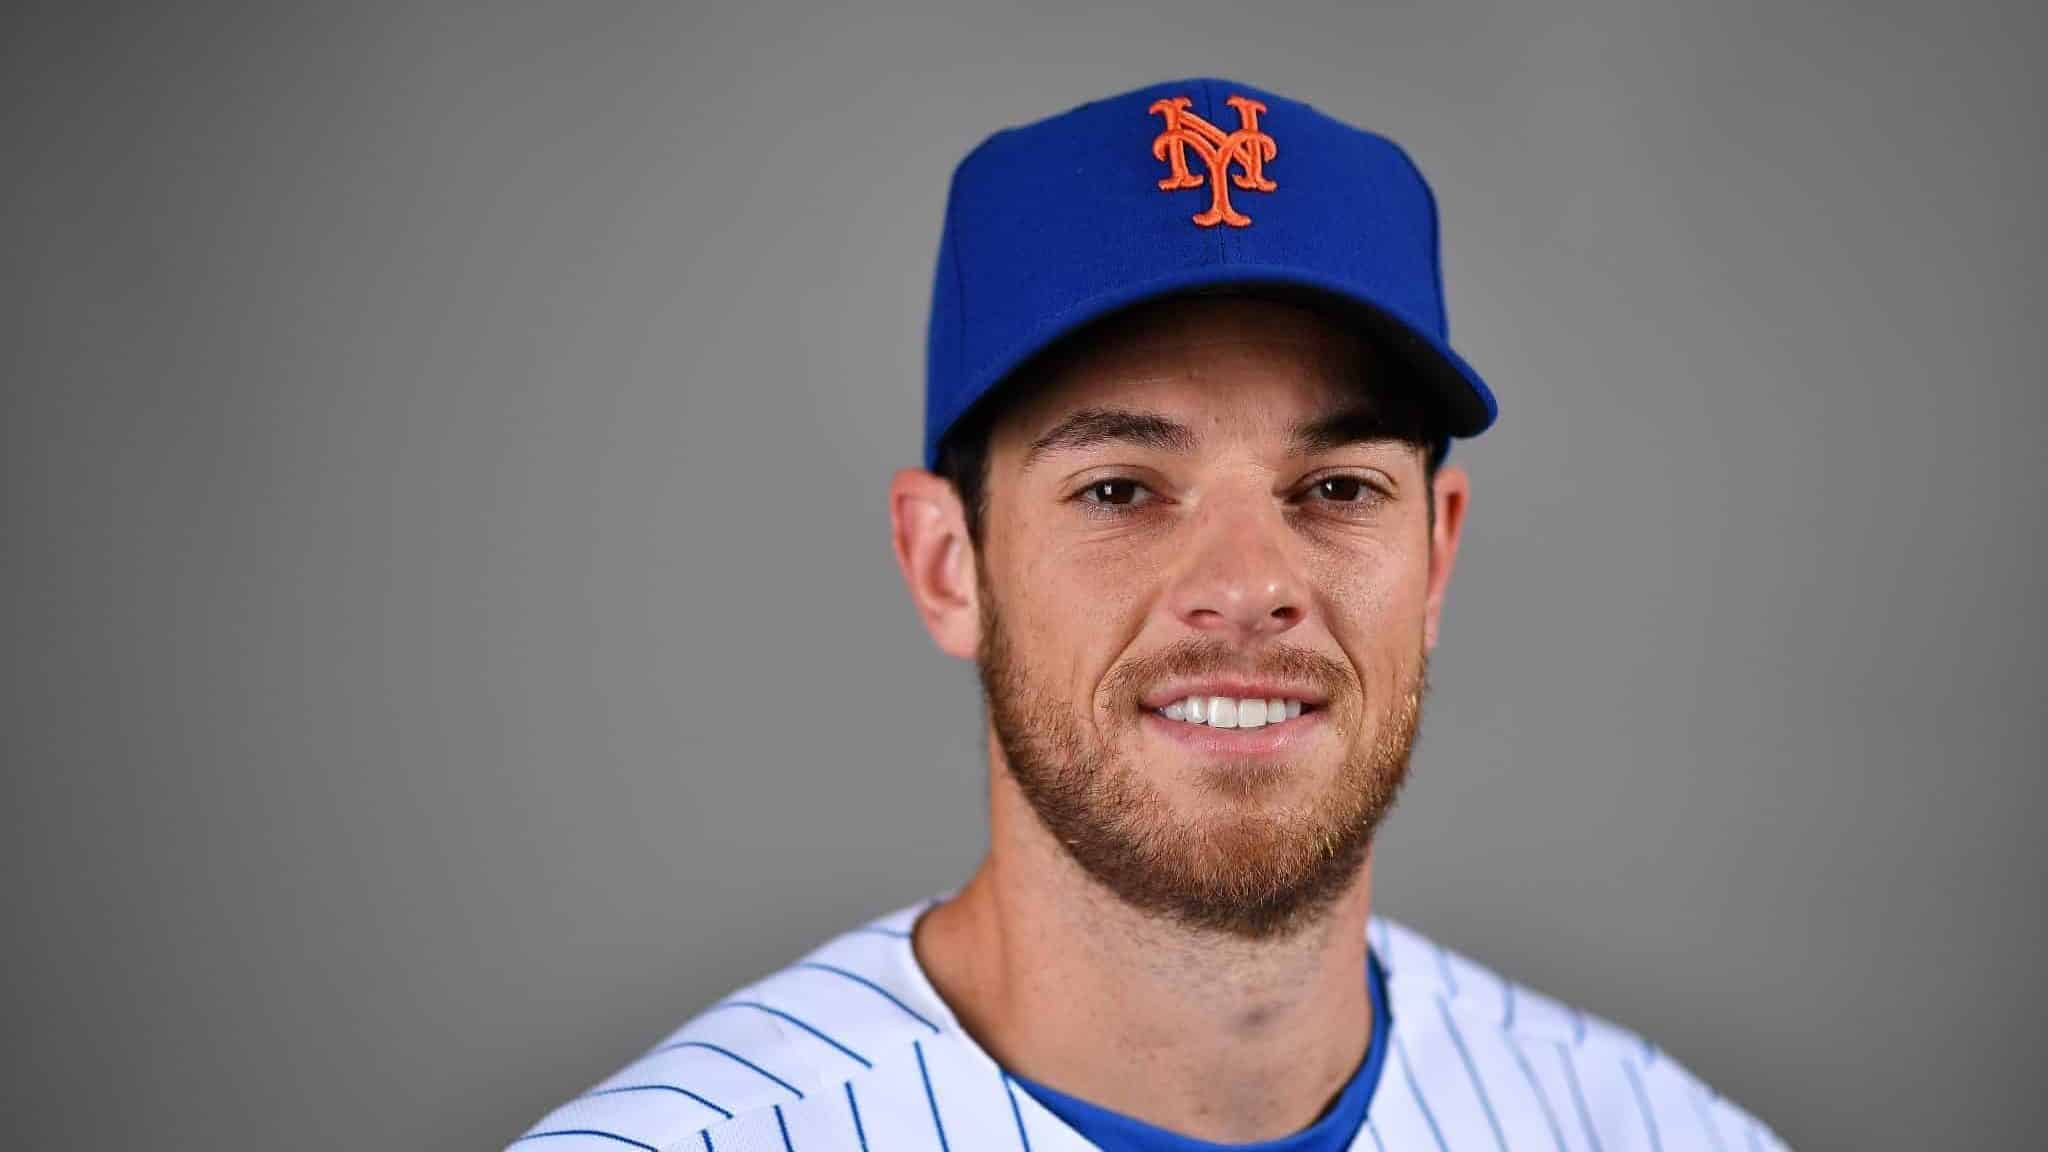 PORT ST. LUCIE, FLORIDA - FEBRUARY 20: Steven Matz #32 of the New York Mets poses for a photo during Photo Day at Clover Park on February 20, 2020 in Port St. Lucie, Florida.